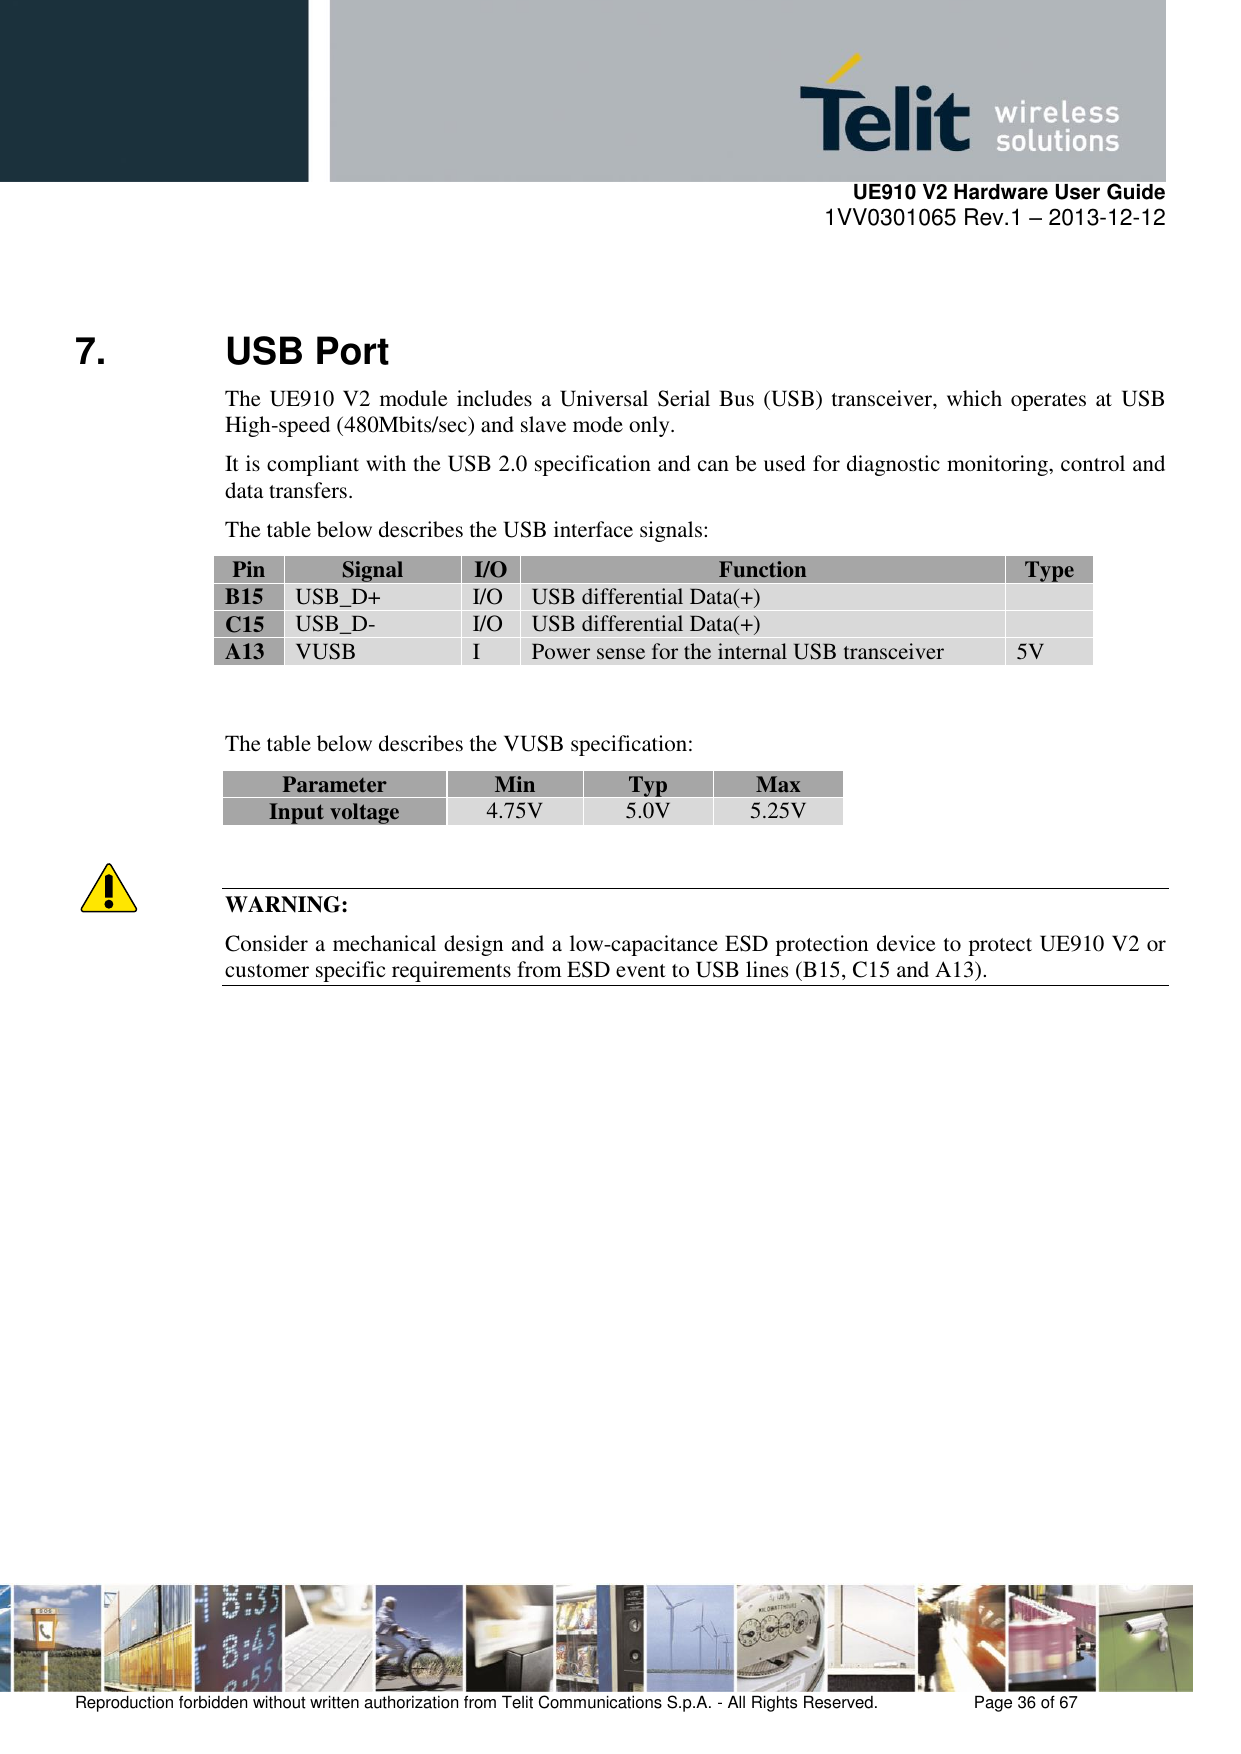     UE910 V2 Hardware User Guide 1VV0301065 Rev.1 – 2013-12-12  Reproduction forbidden without written authorization from Telit Communications S.p.A. - All Rights Reserved.    Page 36 of 67                                                     7. USB Port The UE910 V2 module includes a Universal Serial Bus (USB) transceiver, which operates at  USB High-speed (480Mbits/sec) and slave mode only.  It is compliant with the USB 2.0 specification and can be used for diagnostic monitoring, control and data transfers. The table below describes the USB interface signals: Pin Signal I/O Function Type B15 USB_D+ I/O USB differential Data(+)  C15 USB_D- I/O USB differential Data(+)  A13 VUSB I Power sense for the internal USB transceiver 5V   The table below describes the VUSB specification: Parameter Min Typ Max Input voltage 4.75V 5.0V 5.25V   WARNING: Consider a mechanical design and a low-capacitance ESD protection device to protect UE910 V2 or customer specific requirements from ESD event to USB lines (B15, C15 and A13).               